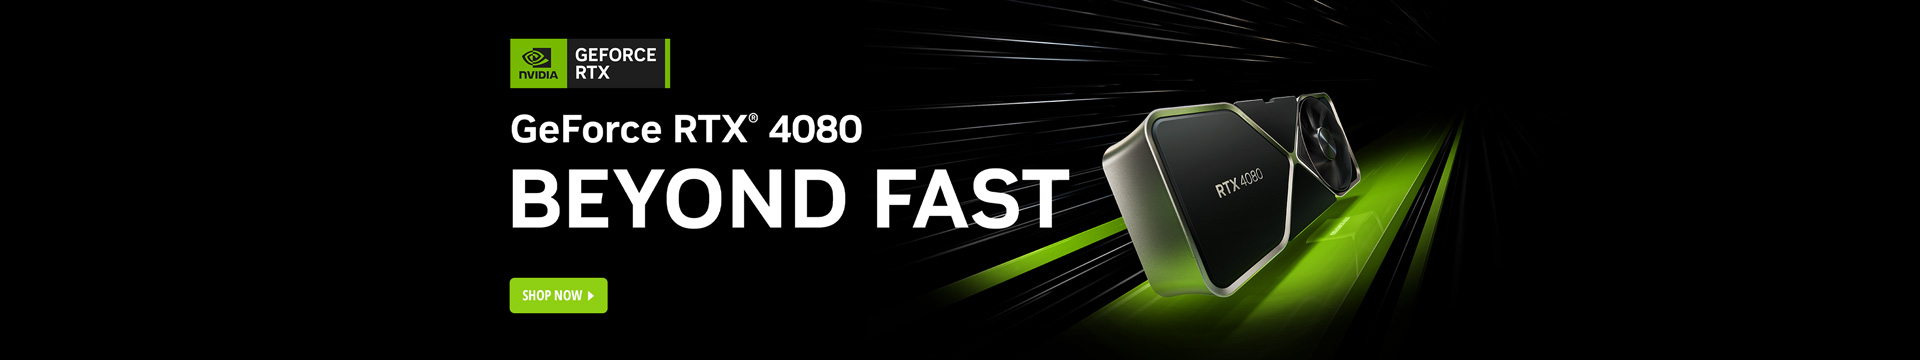 RTX 4080 Video Cards